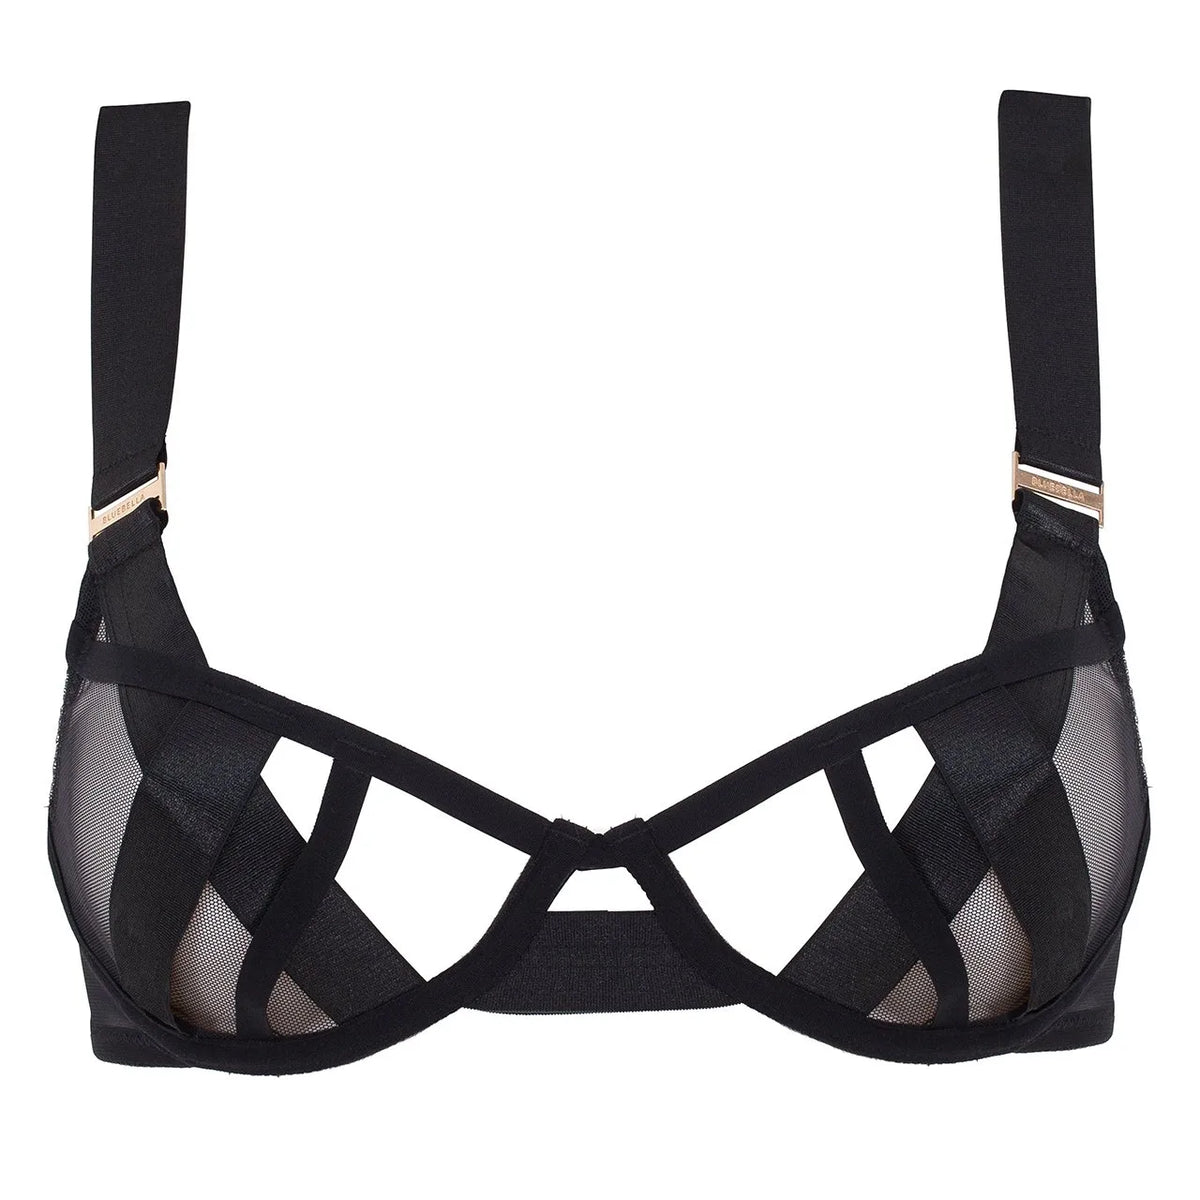 SAWYER Semi-Open Cup Bra from Bluebella at Belle Lacet Lingerie.